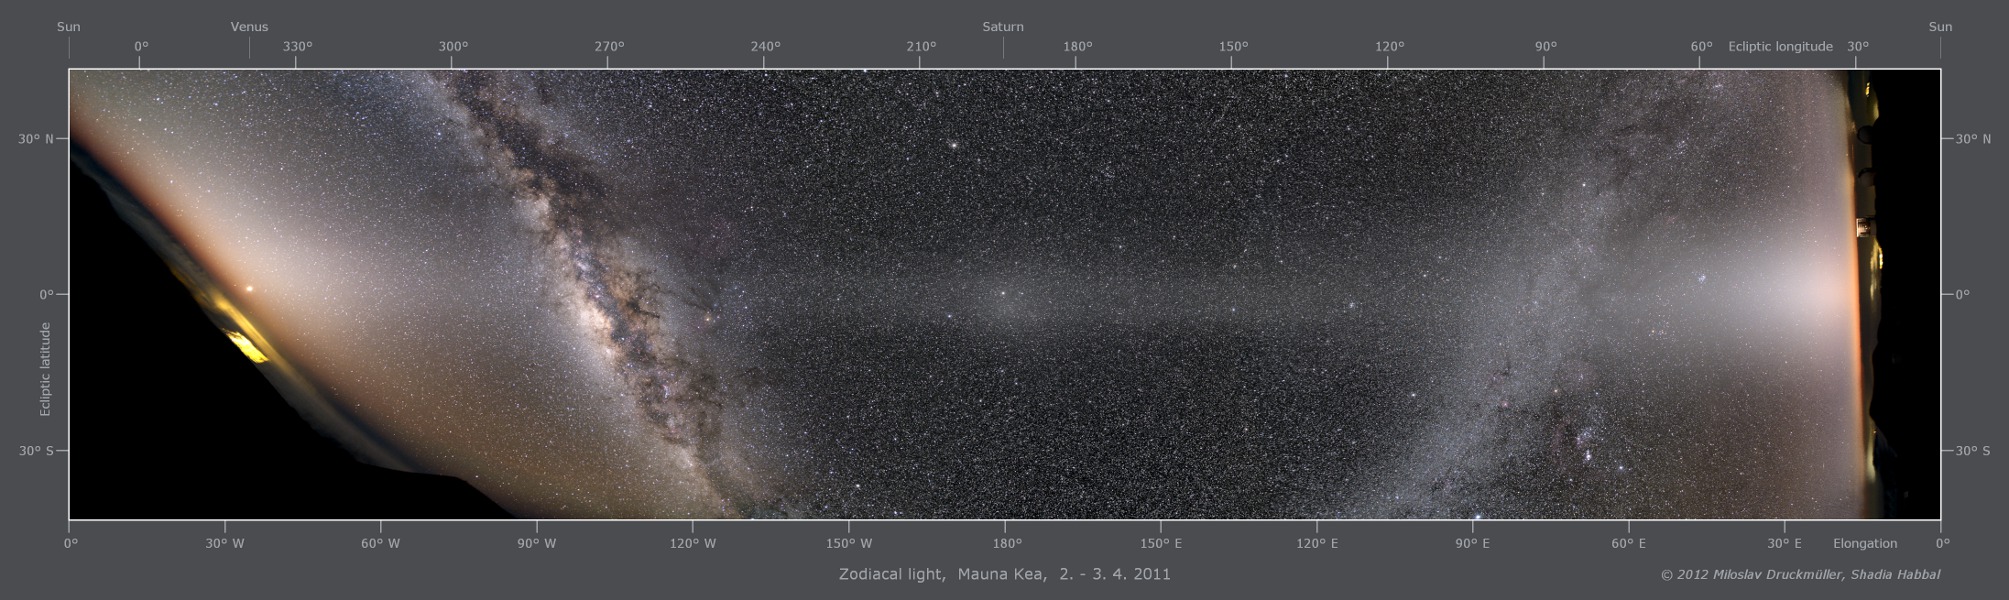 See Explanation.  Clicking on the picture will download<br />
 the highest resolution version available.” /></a></p>
<p><center><strong> Zodiacal Light Panorama </strong><br />
<strong>Image Credit & <a href=